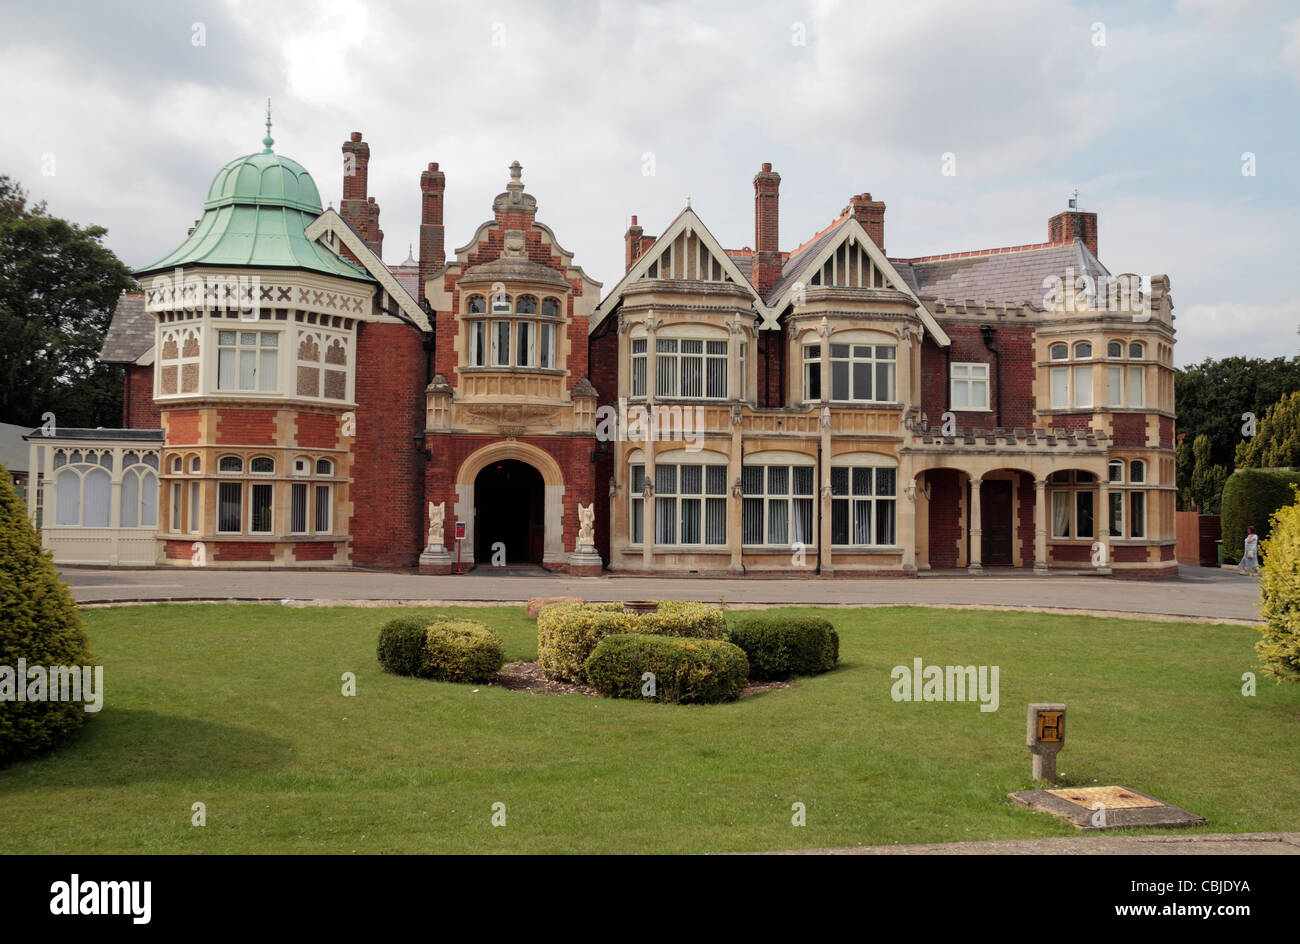 Front view of the manor house in Bletchley Park, Bletchley. Buckinghamshire, UK.  (Aug 2010) Stock Photo